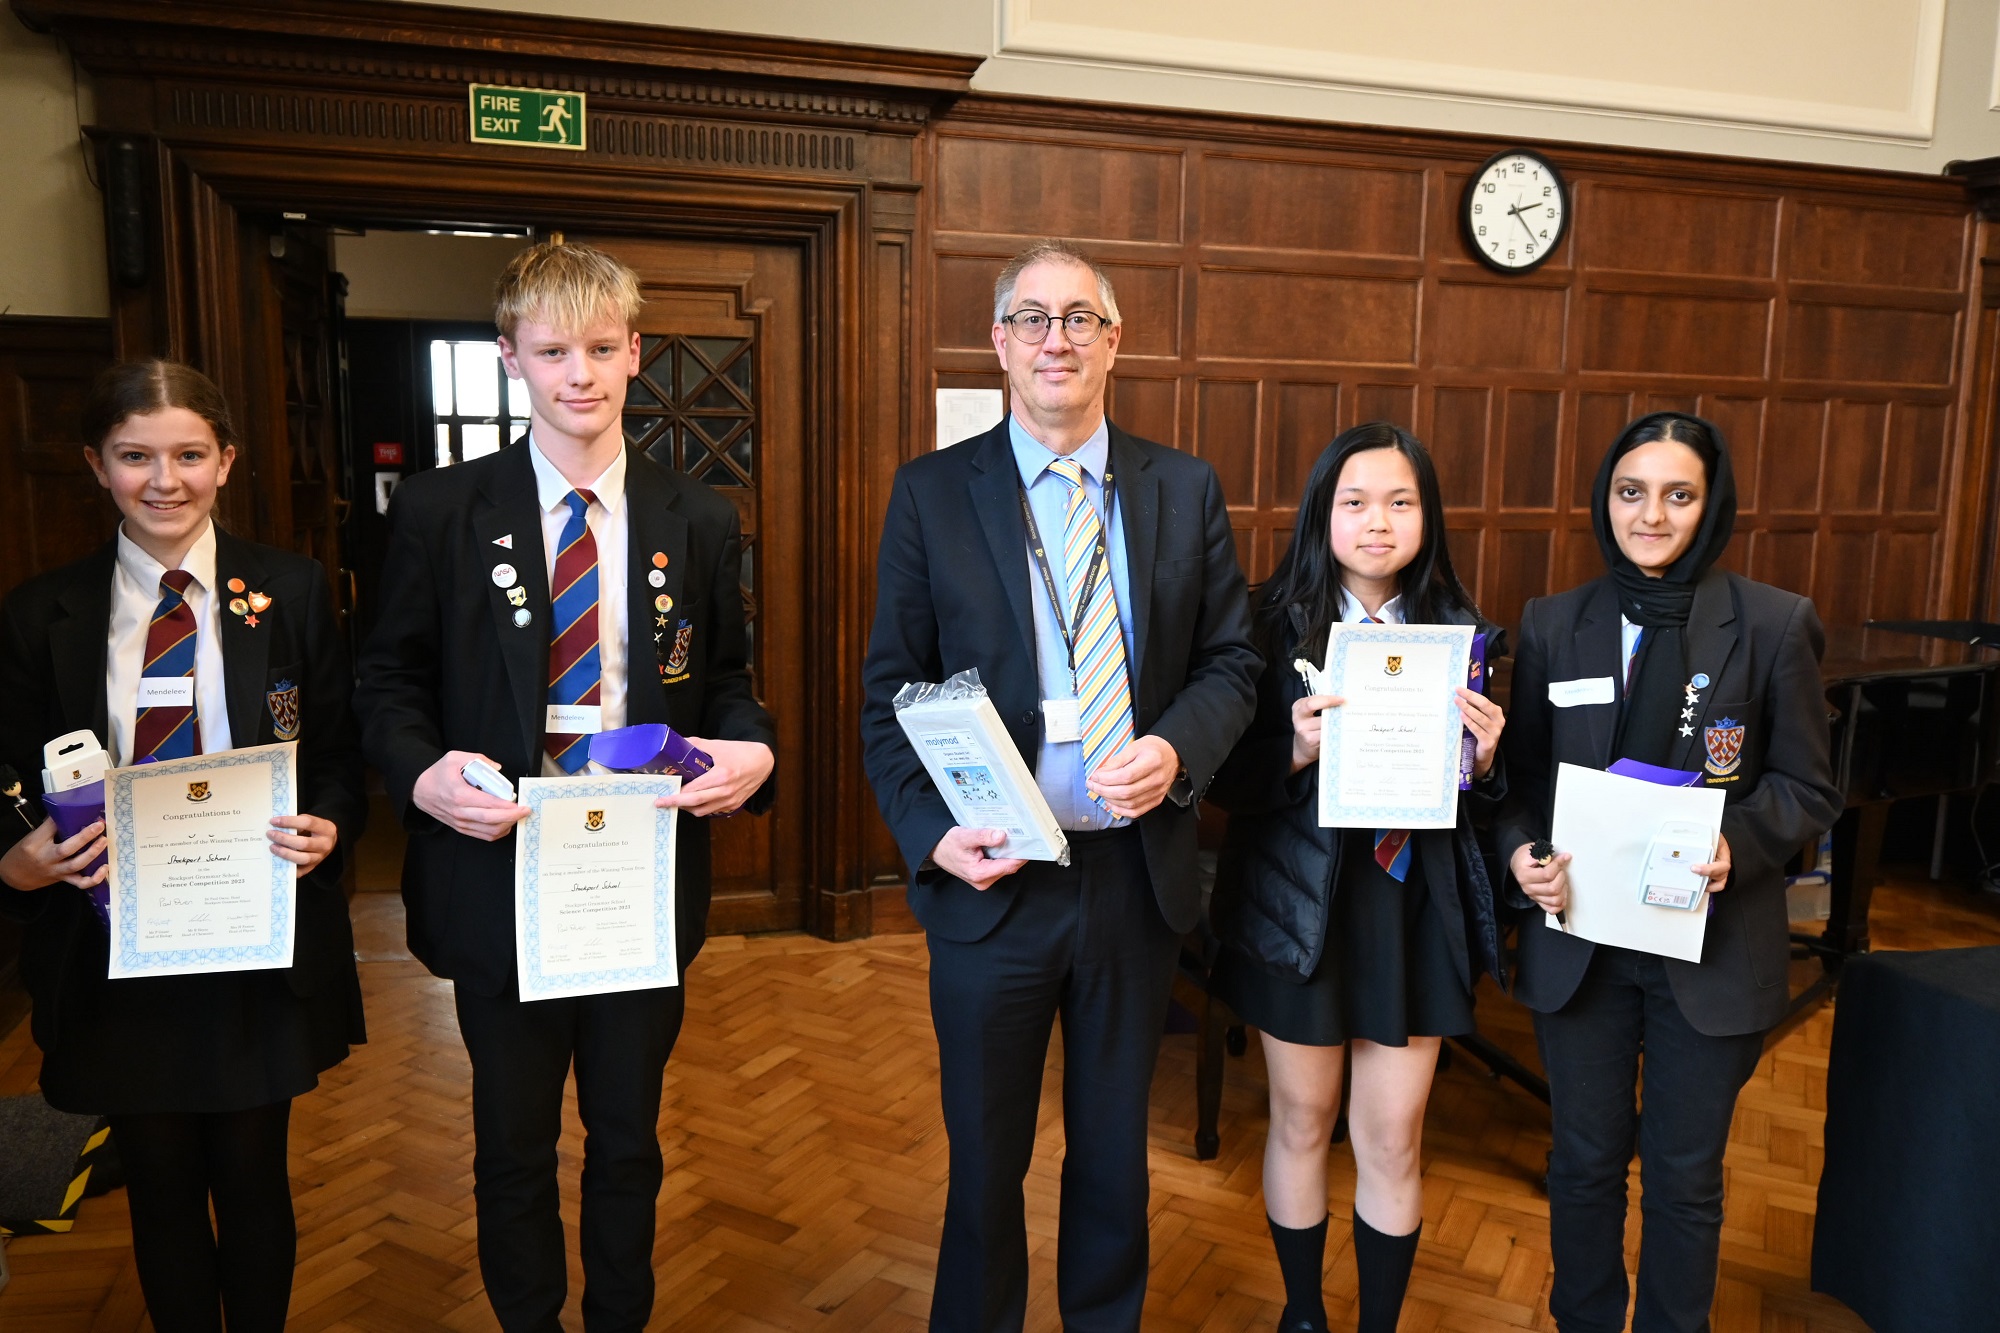 Stockport School students came first in the 2023 Science Competition